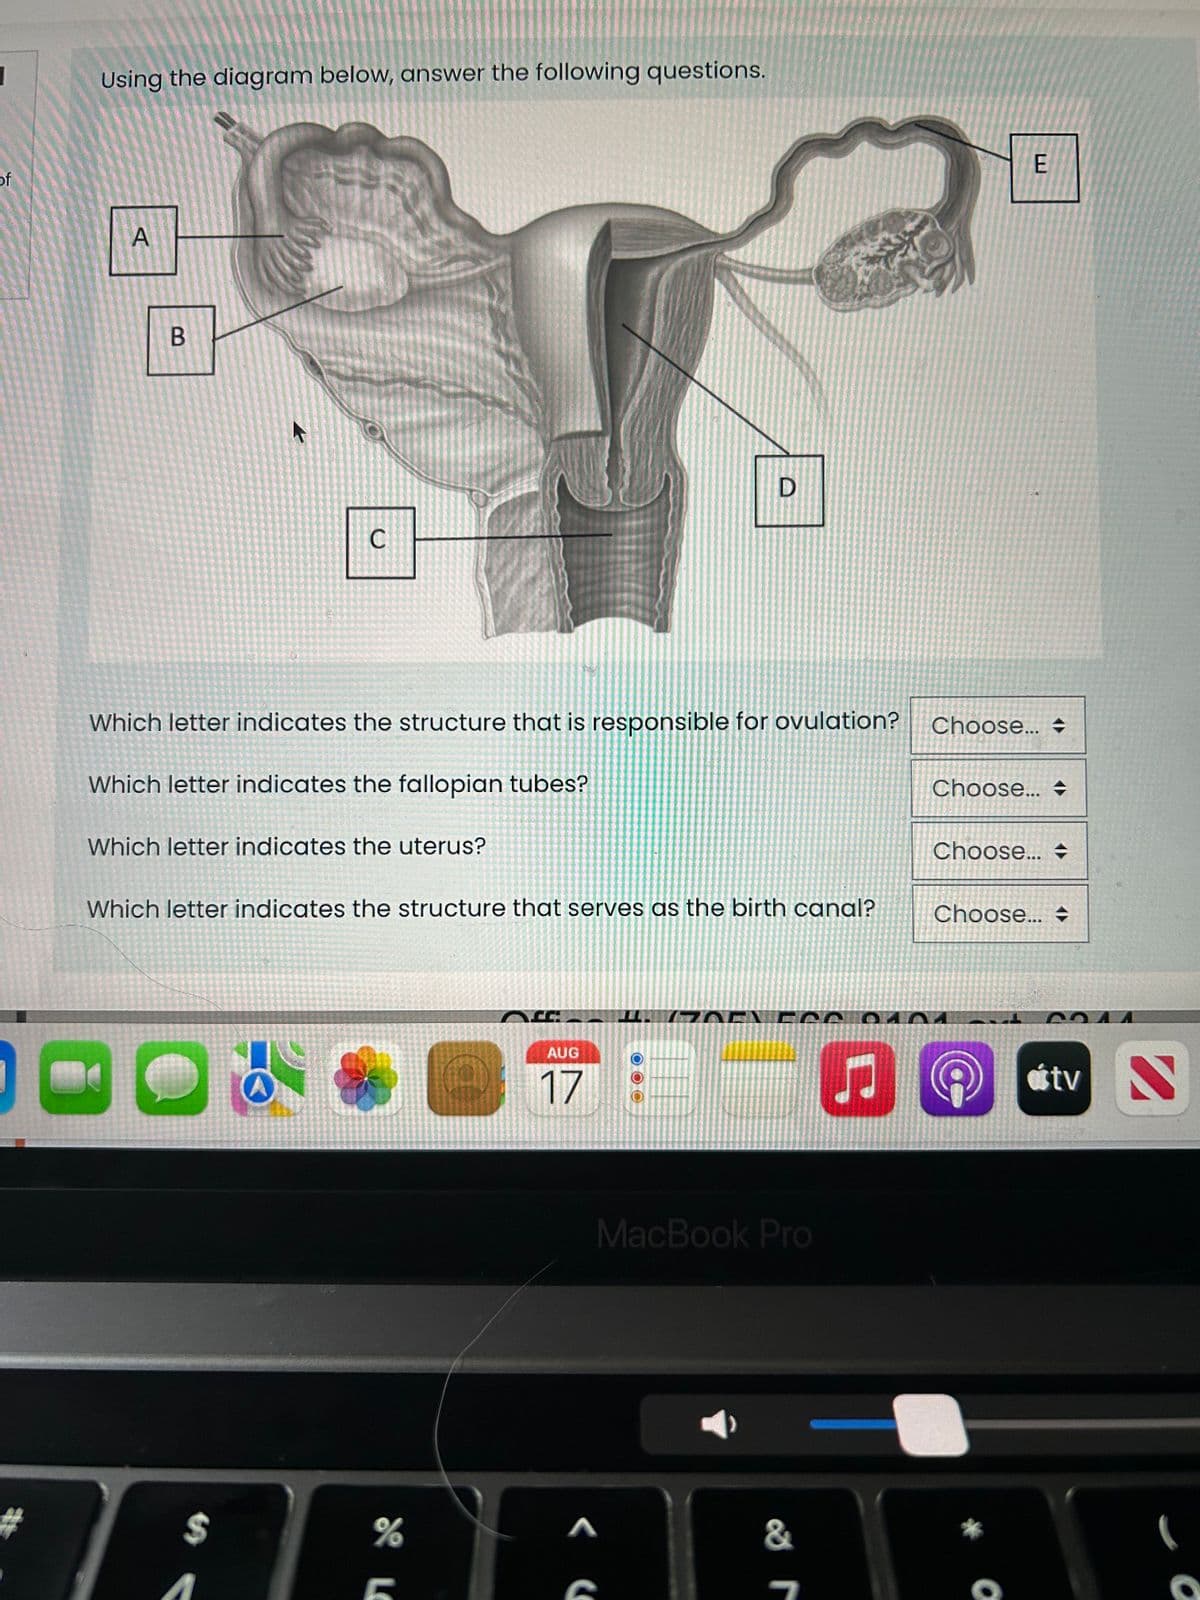 ]
of
Using the diagram below, answer the following questions.
A
B
C
Which letter indicates the structure that is responsible for ovulation?
Which letter indicates the fallopian tubes?
Which letter indicates the uterus?
$
Which letter indicates the structure that serves as the birth canal?
A
%
D
AUG
17
D
01 LOCK
A
C
MacBook Pro
&
♫
E
Choose...
Choose...
Choose...
Choose...
O
C044
stv S
O